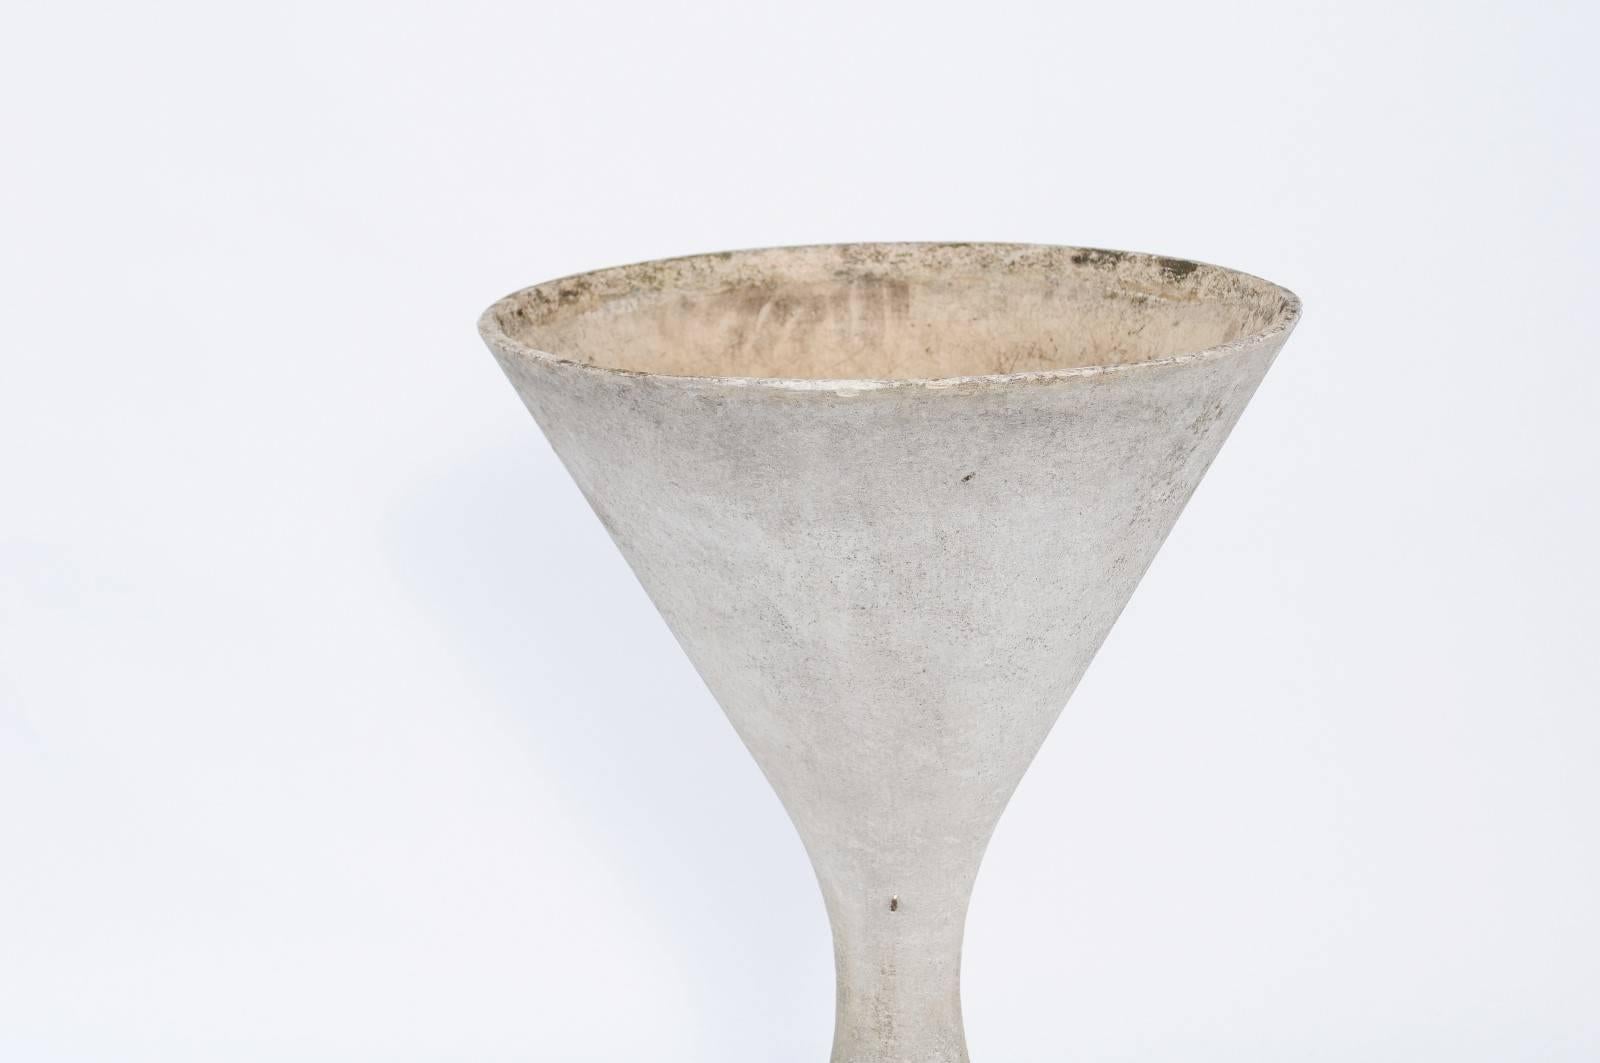 Concrete Willy Guhl Fiber Cement Diabolo Planter from Switzerland from the 1950s